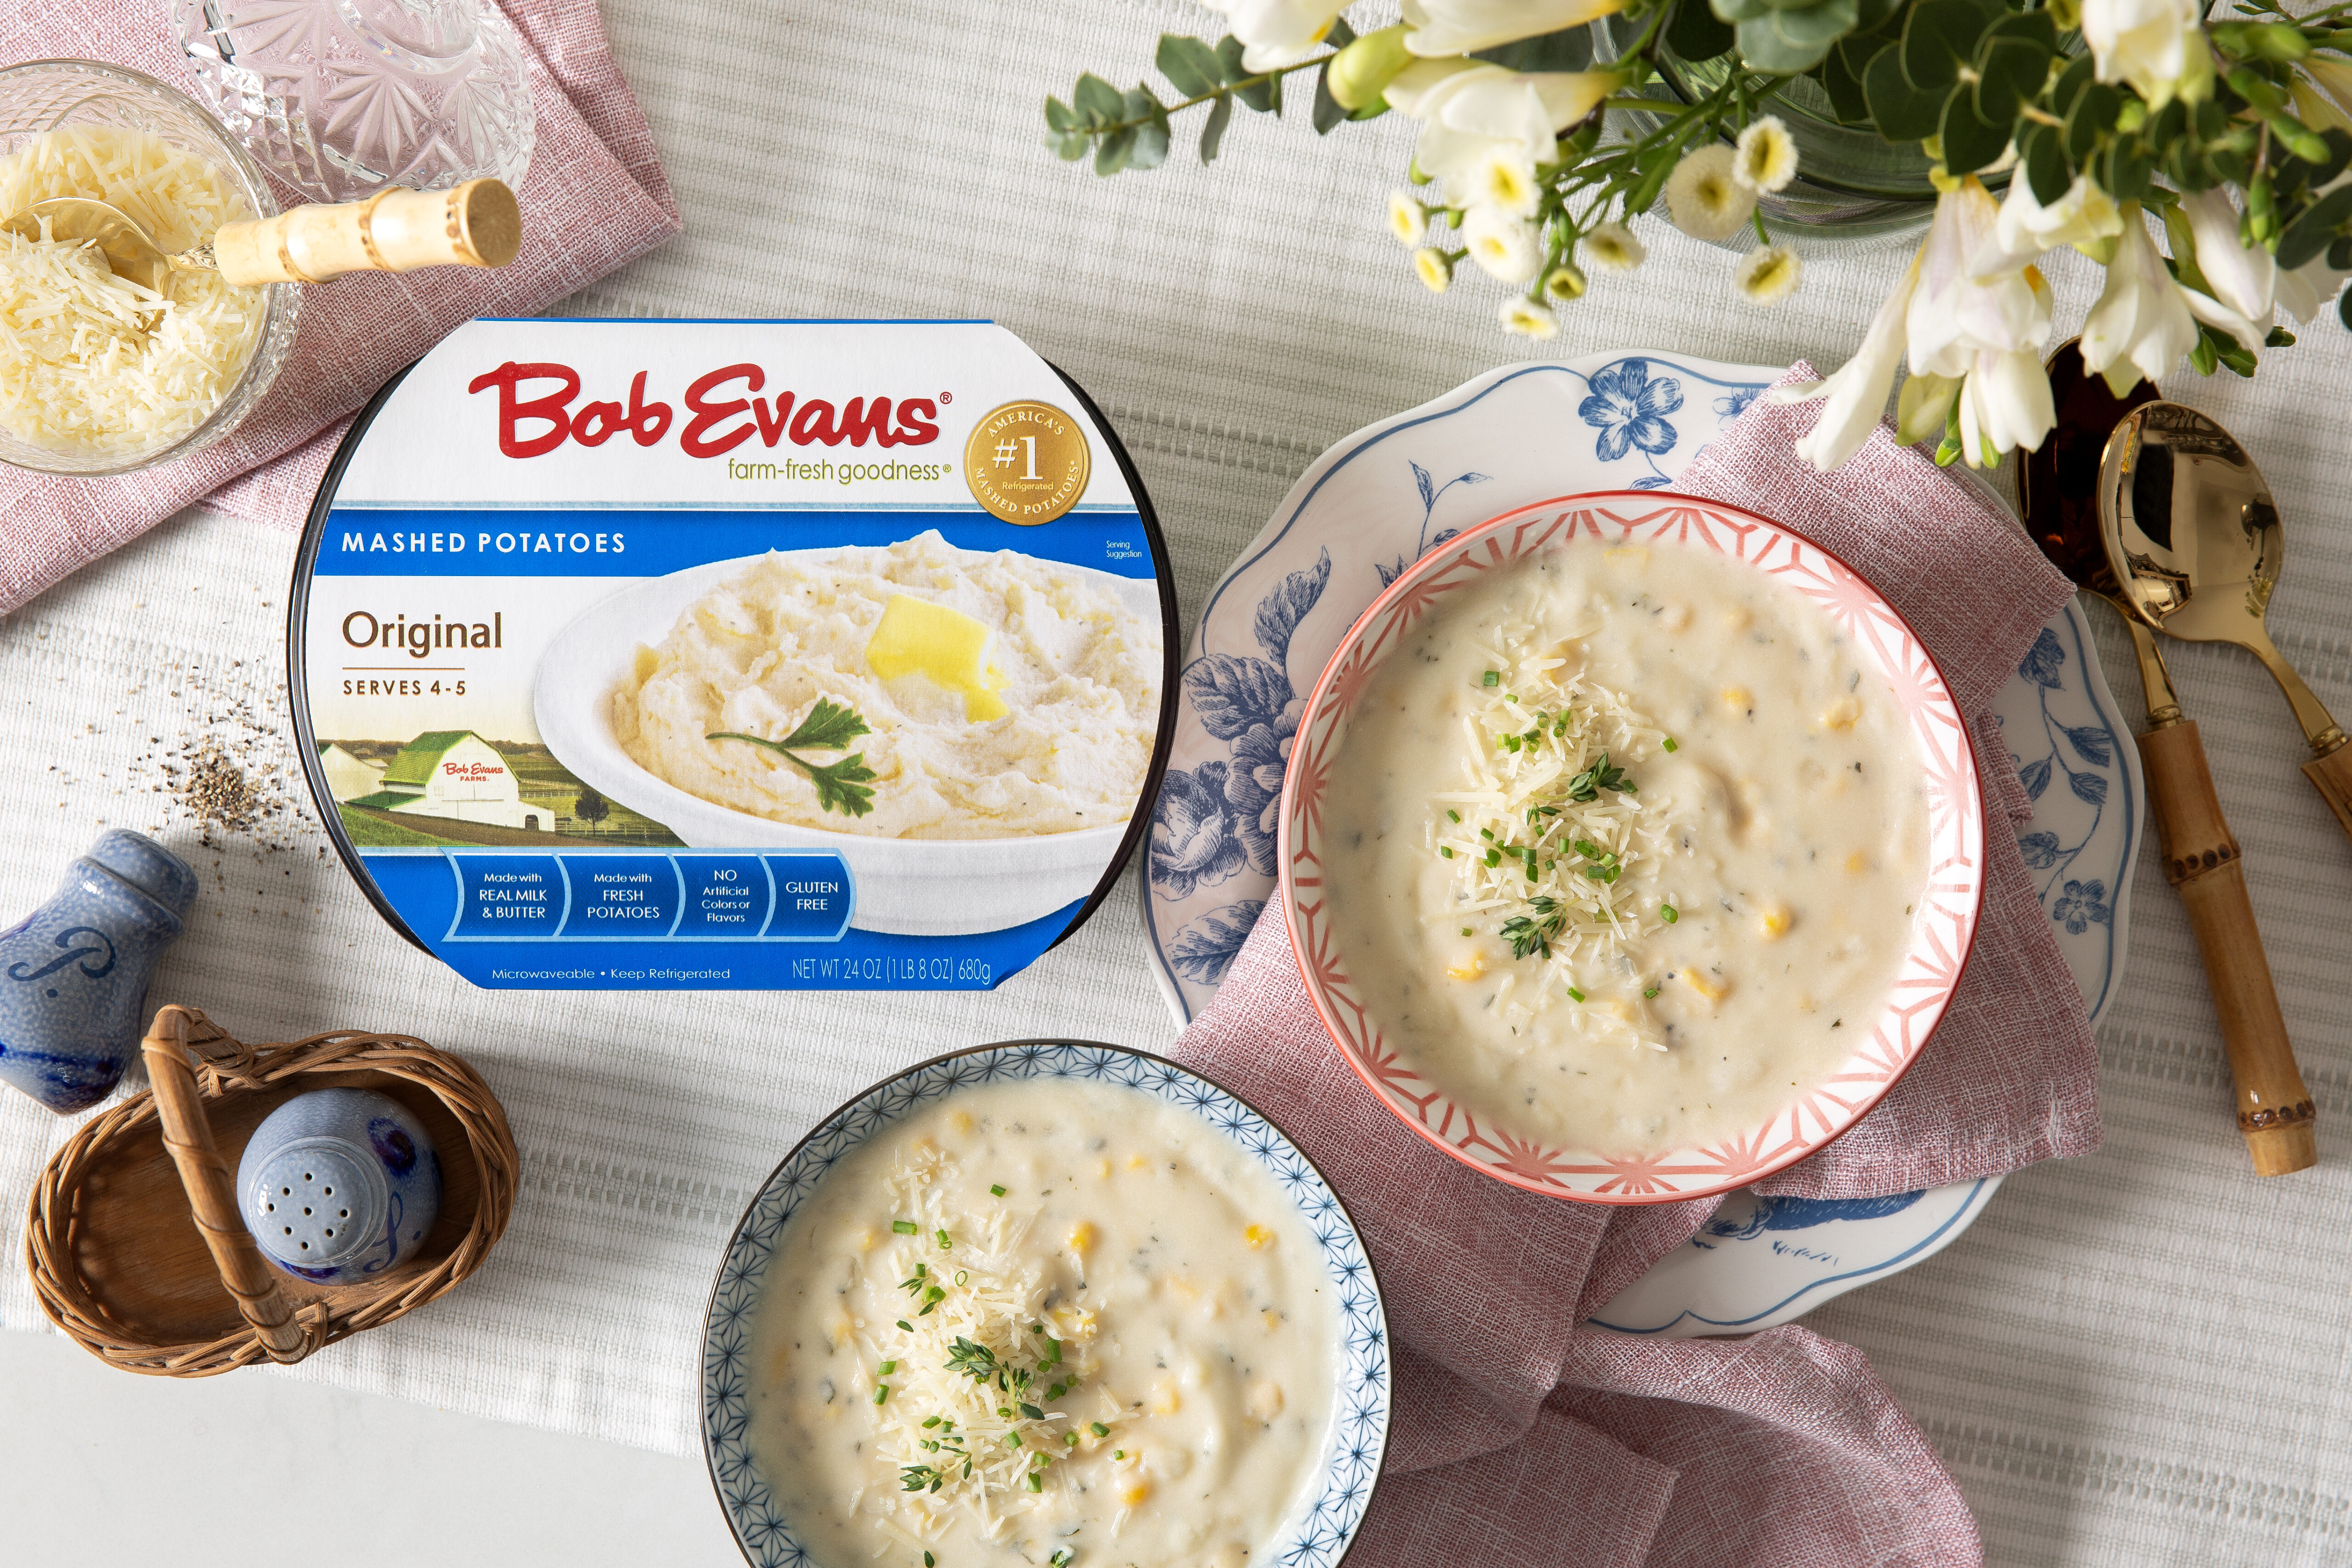 two bowls of potato and corn chowder next to a package of Bob Evans Original Mashed Potatoes